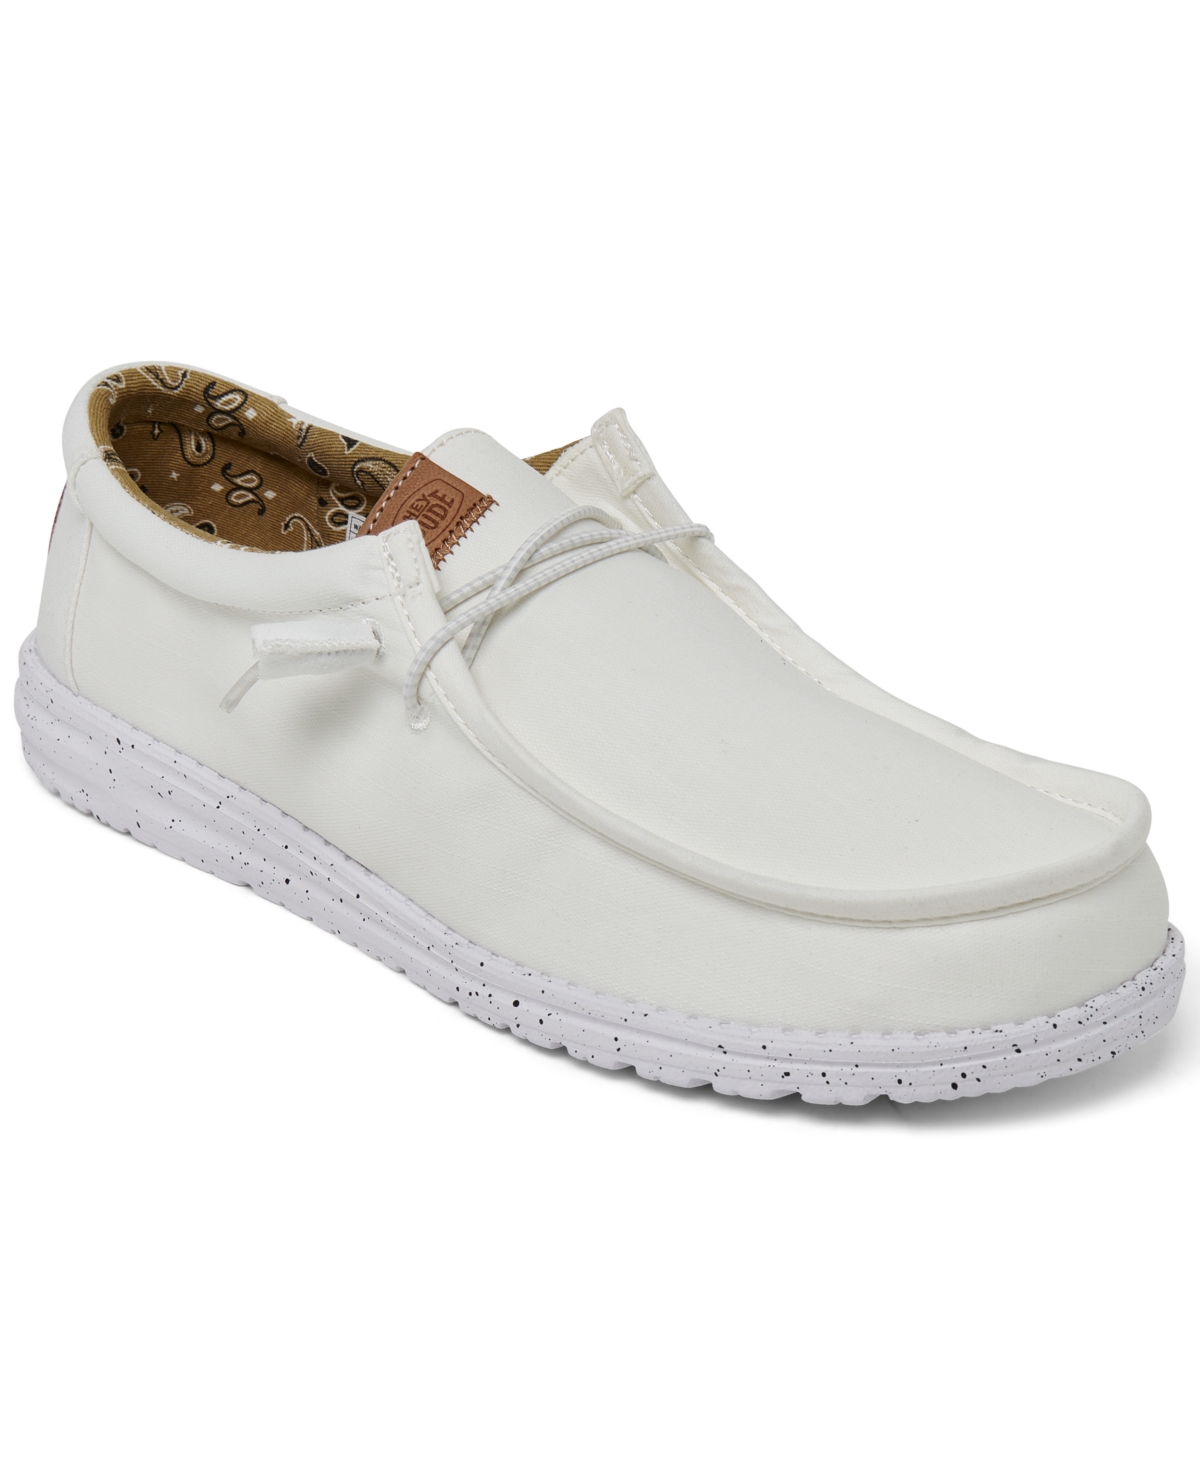 Men's Wally Washed Canvas Casual Moccasin Sneakers from Finish Line - White